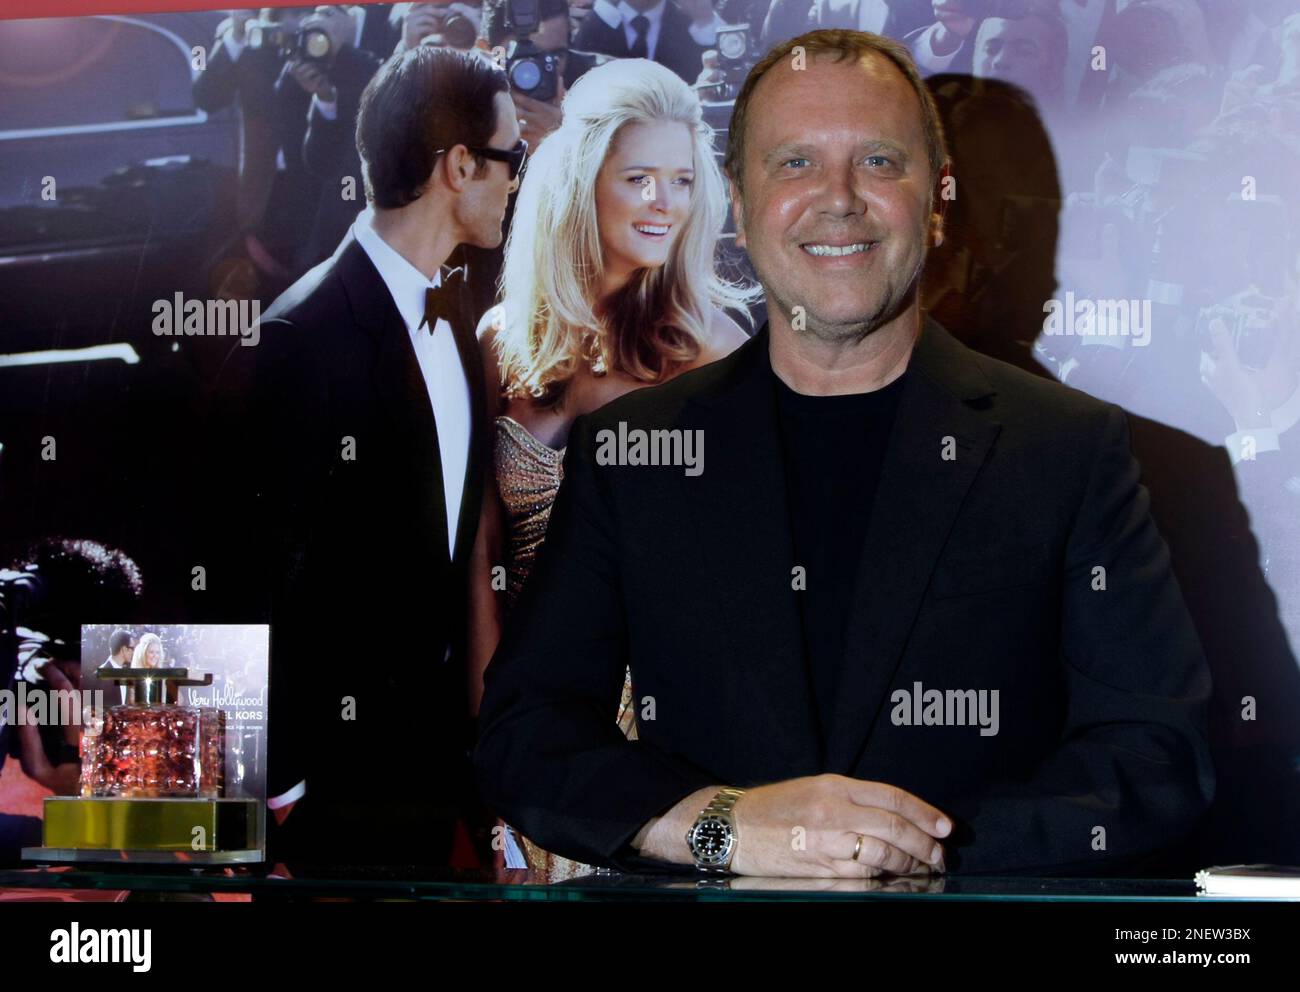 US fashion designer Michael Kors at Harrods department store as he poses  for the cameras at the launch of the Very Hollywood Michael Kors  fragrance.in London, Thursday, Oct. 1, 2009 . (AP